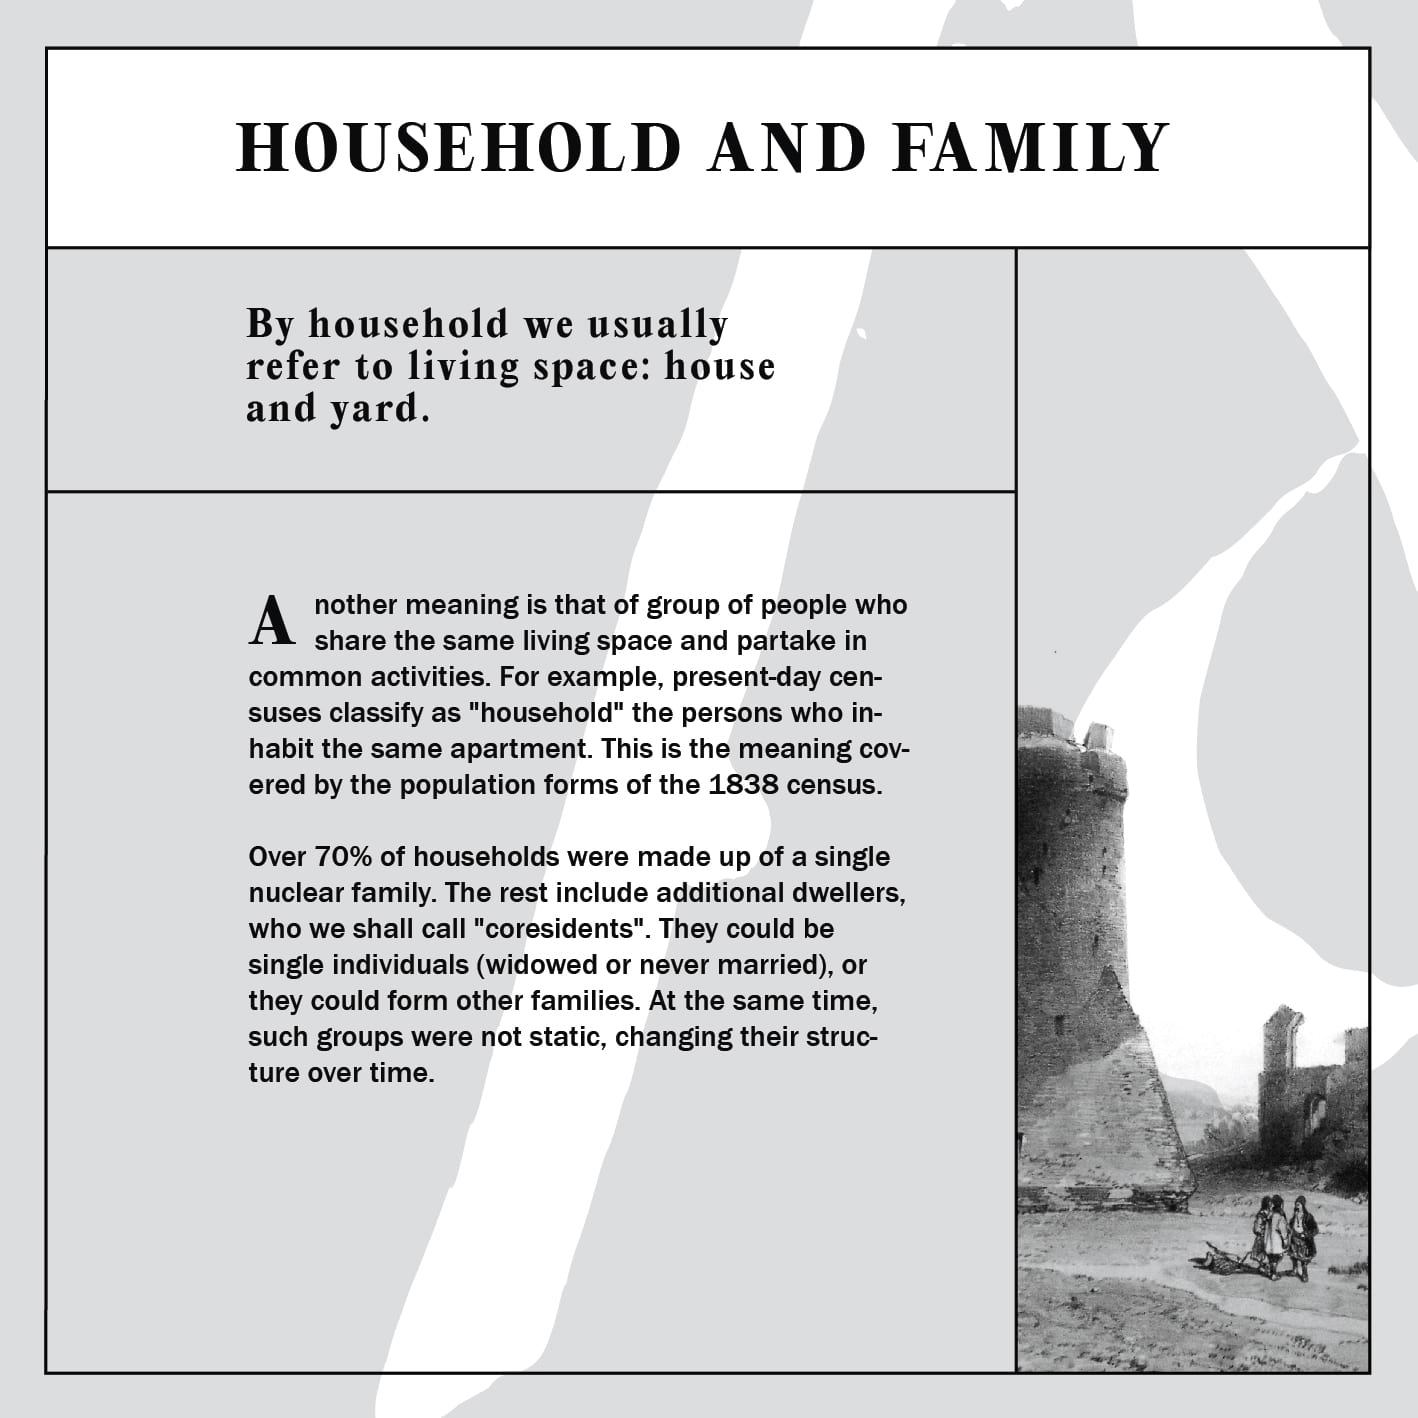 Household and family